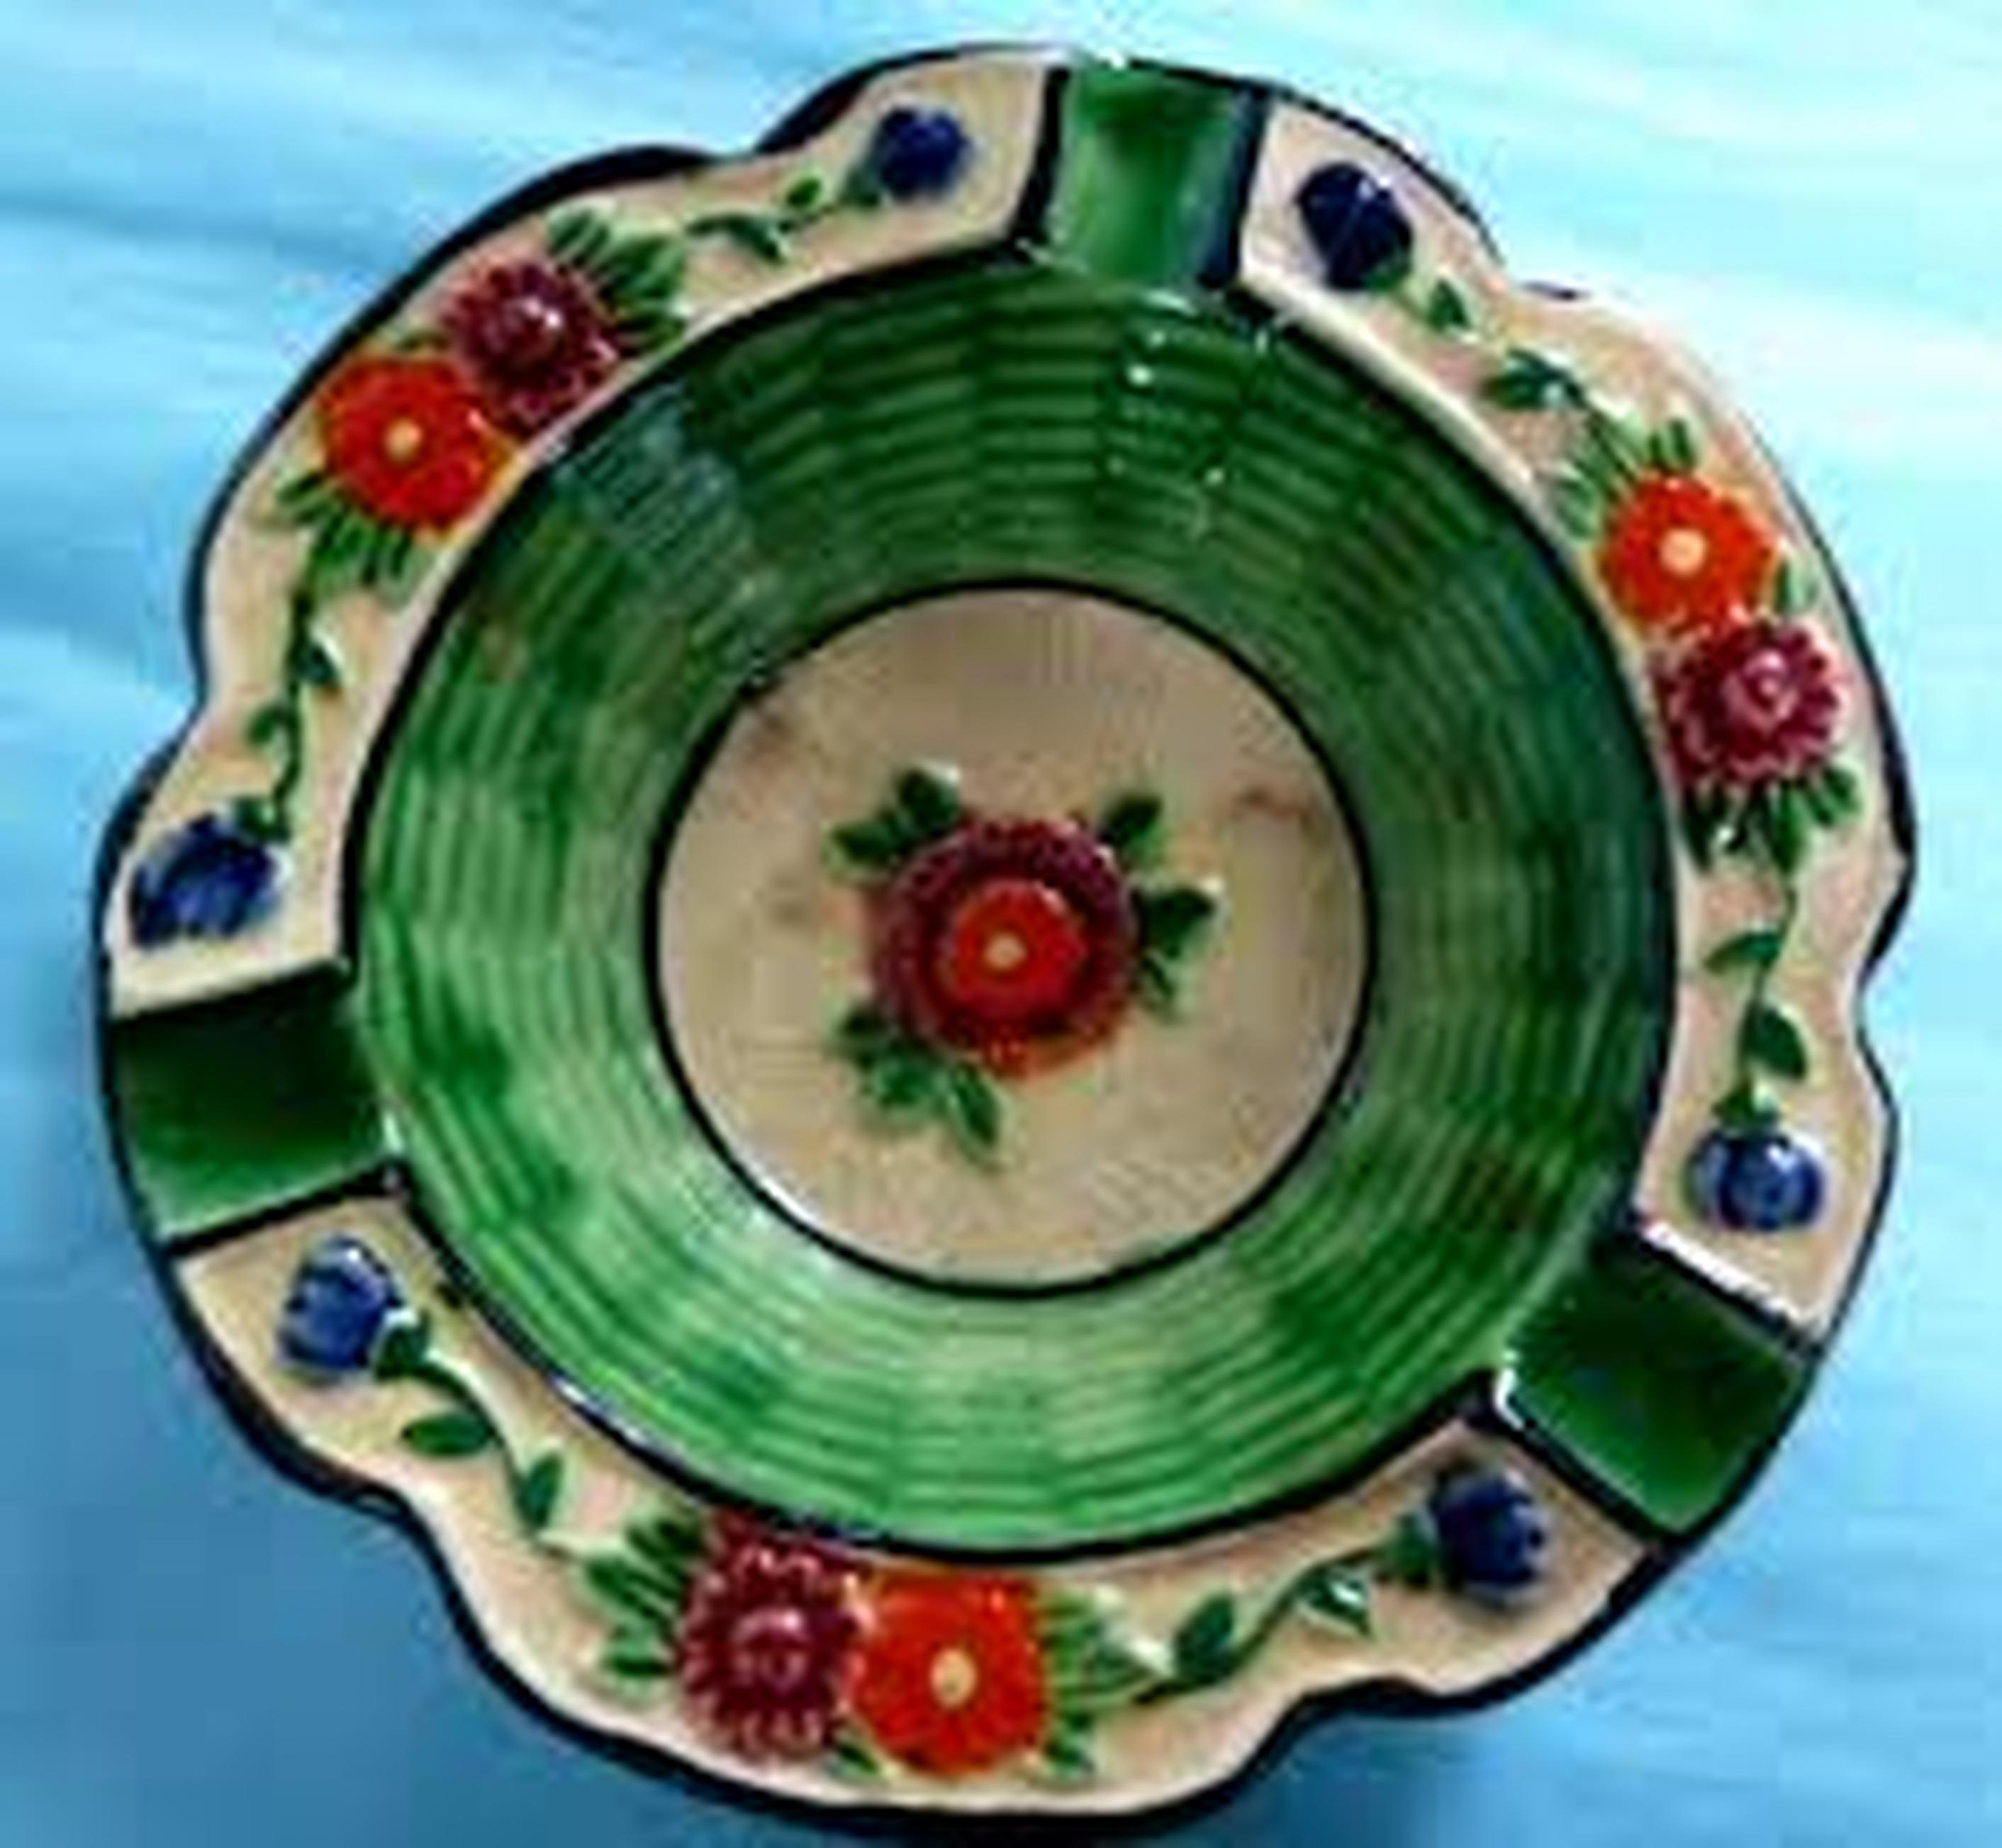 1910s - 1920s Maruhon ware ashtray ($22) Made in Japan. Hand painted. D: 115mm